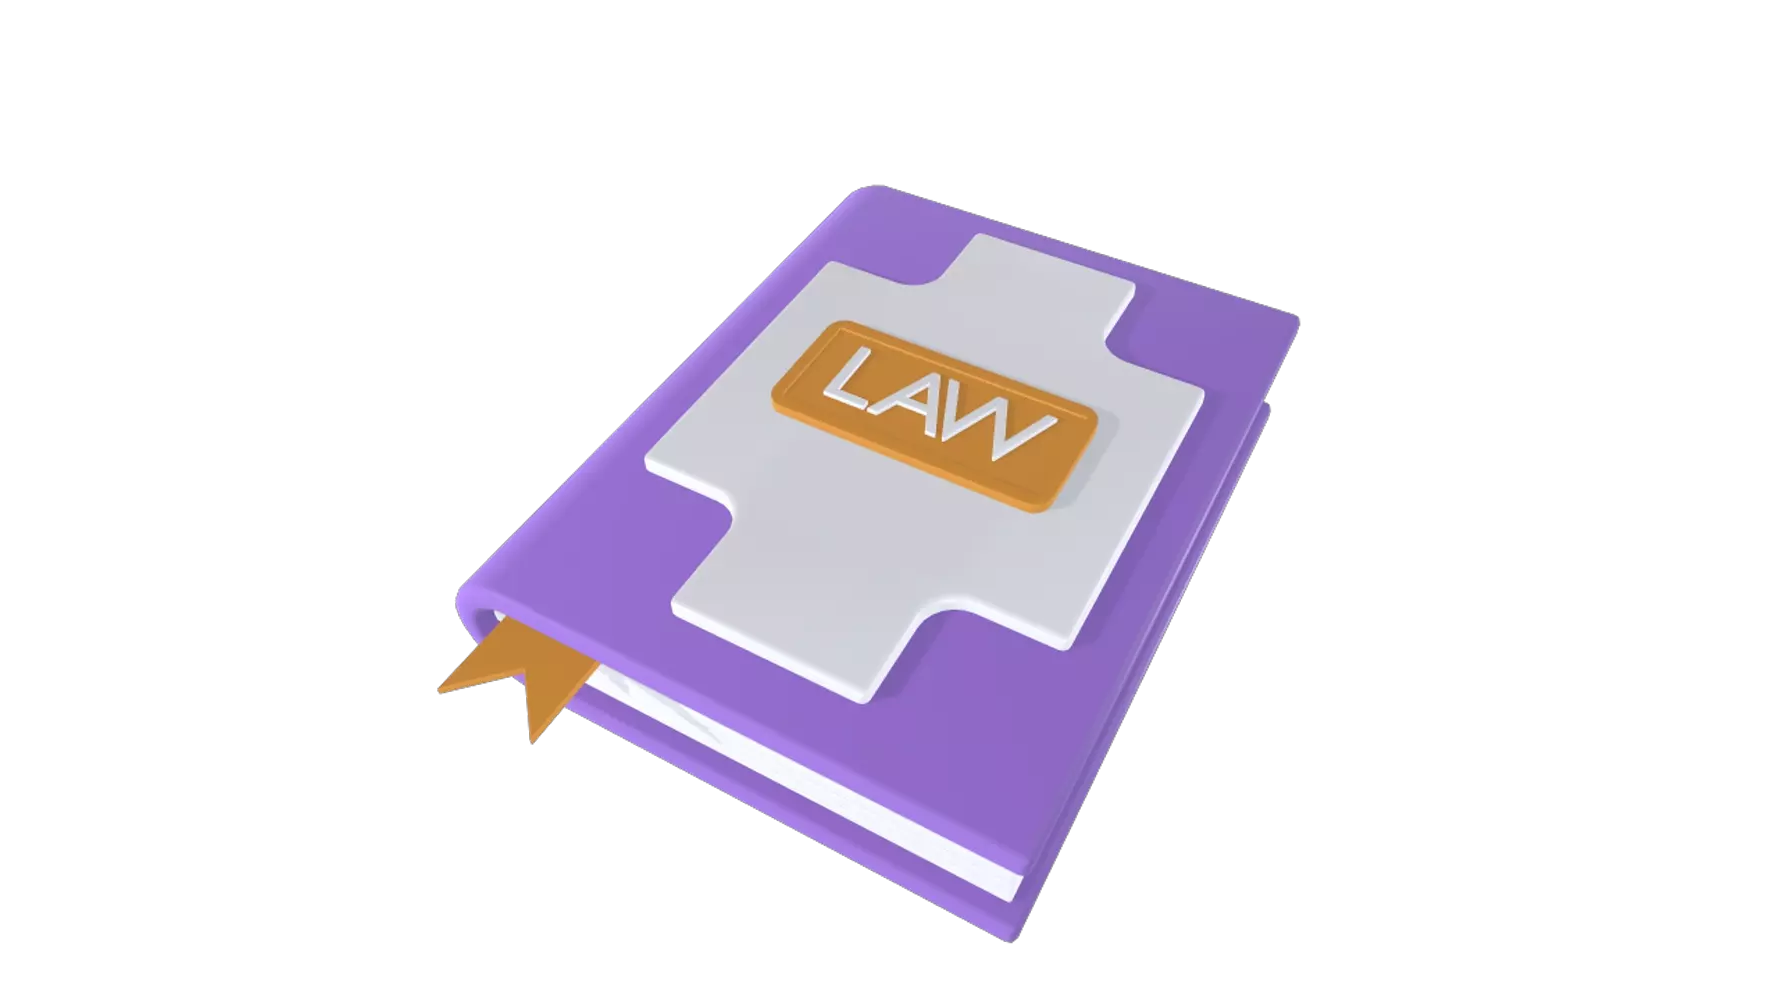 Law Book 3D Graphic